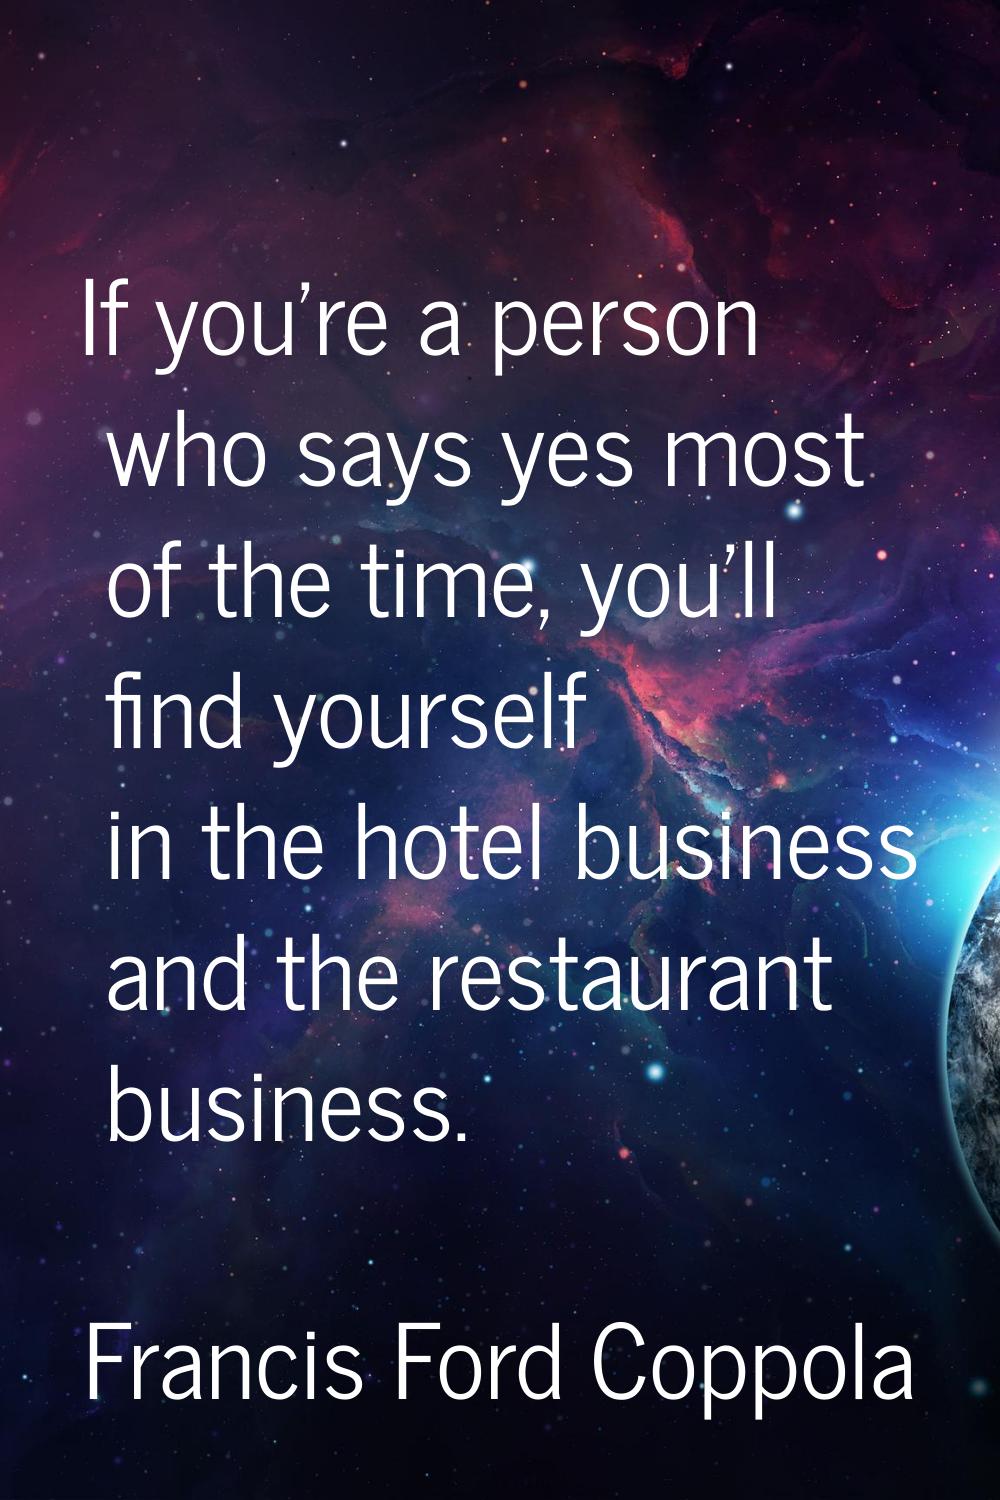 If you're a person who says yes most of the time, you'll find yourself in the hotel business and th